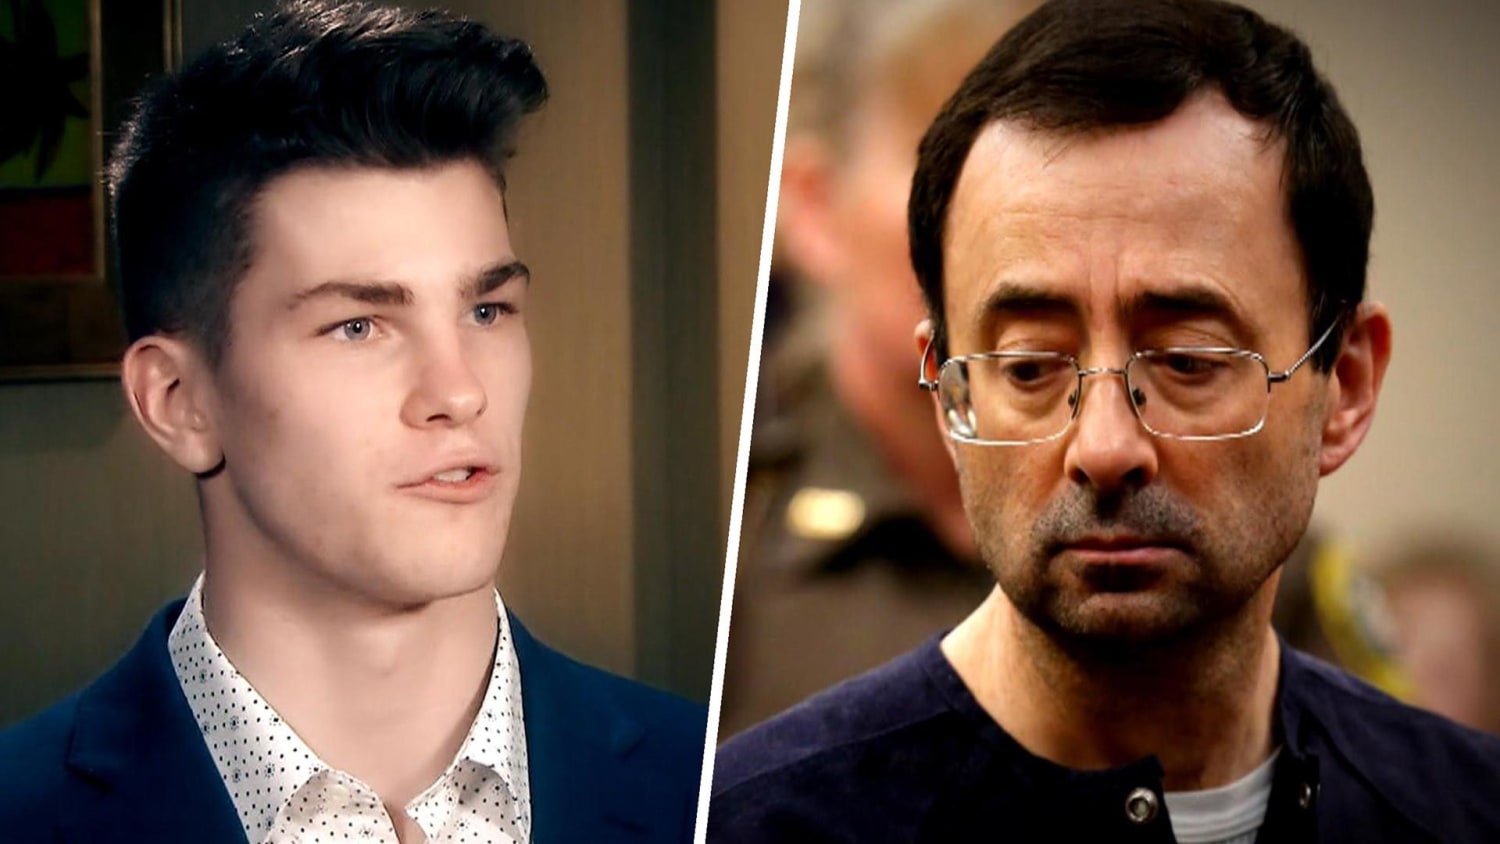 Jacob Moore, first male gymnast to accuse Larry Nassar of sexual abuse, lashes